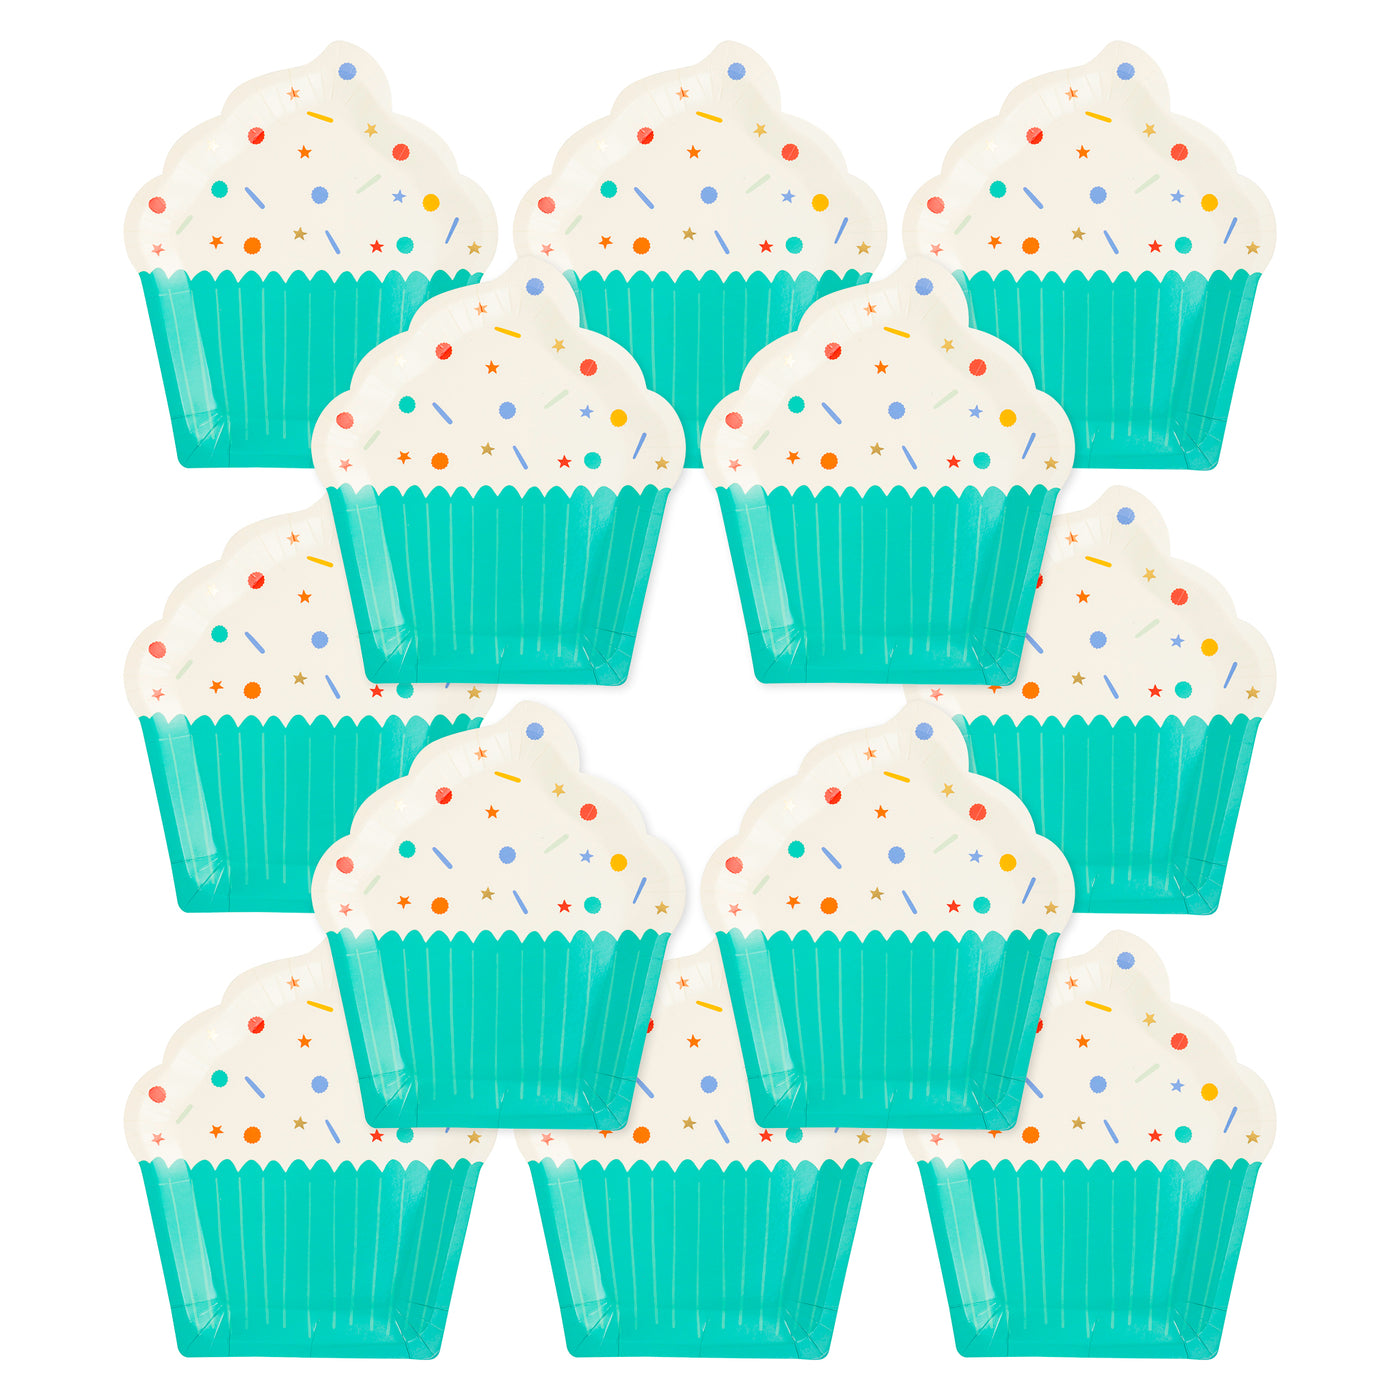 PLBDY41 - Birthday Cupcake Shaped Paper Plate